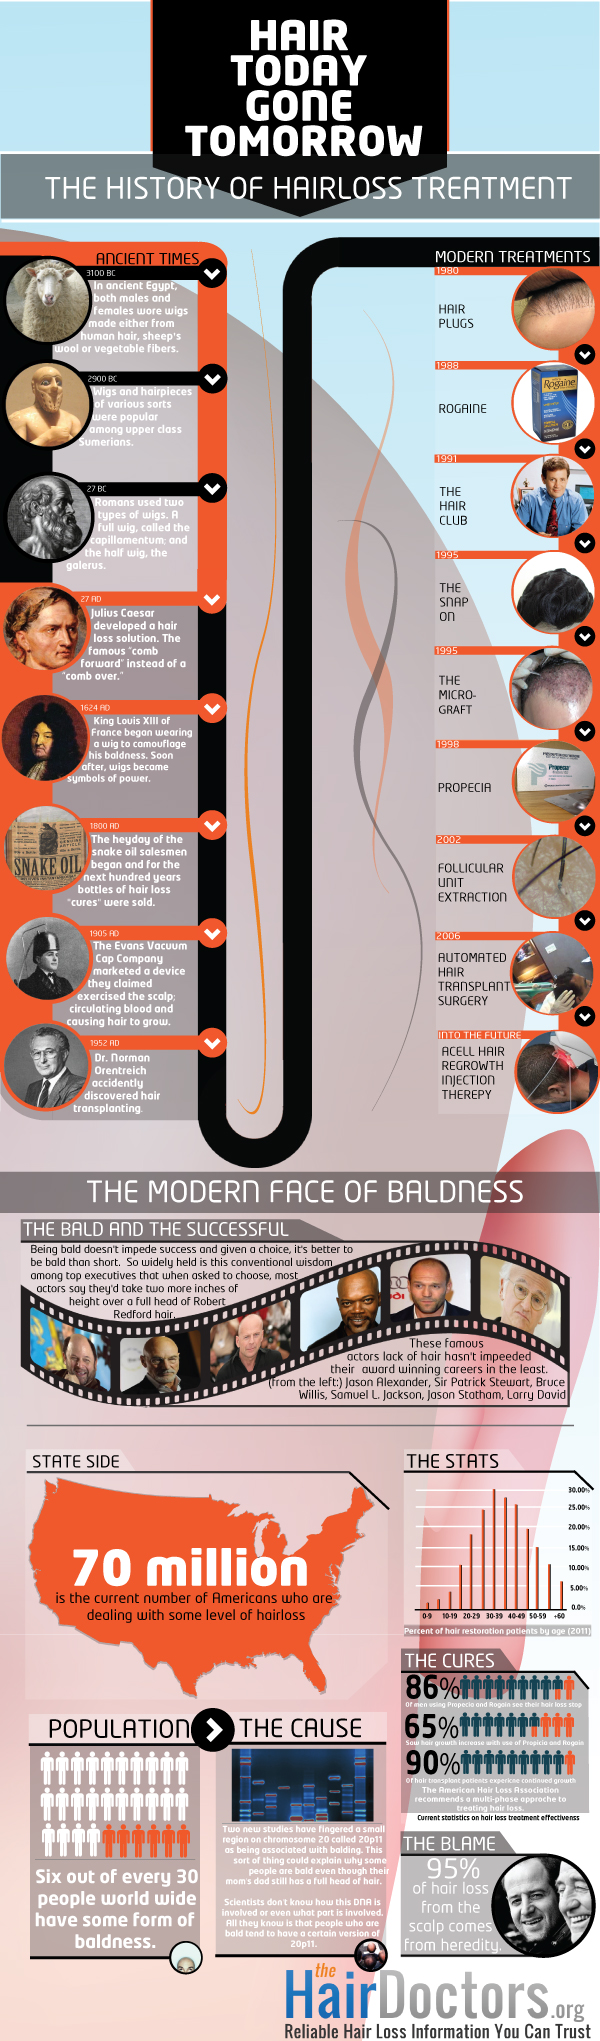 Hair-Loss-Treatment-History-infographic